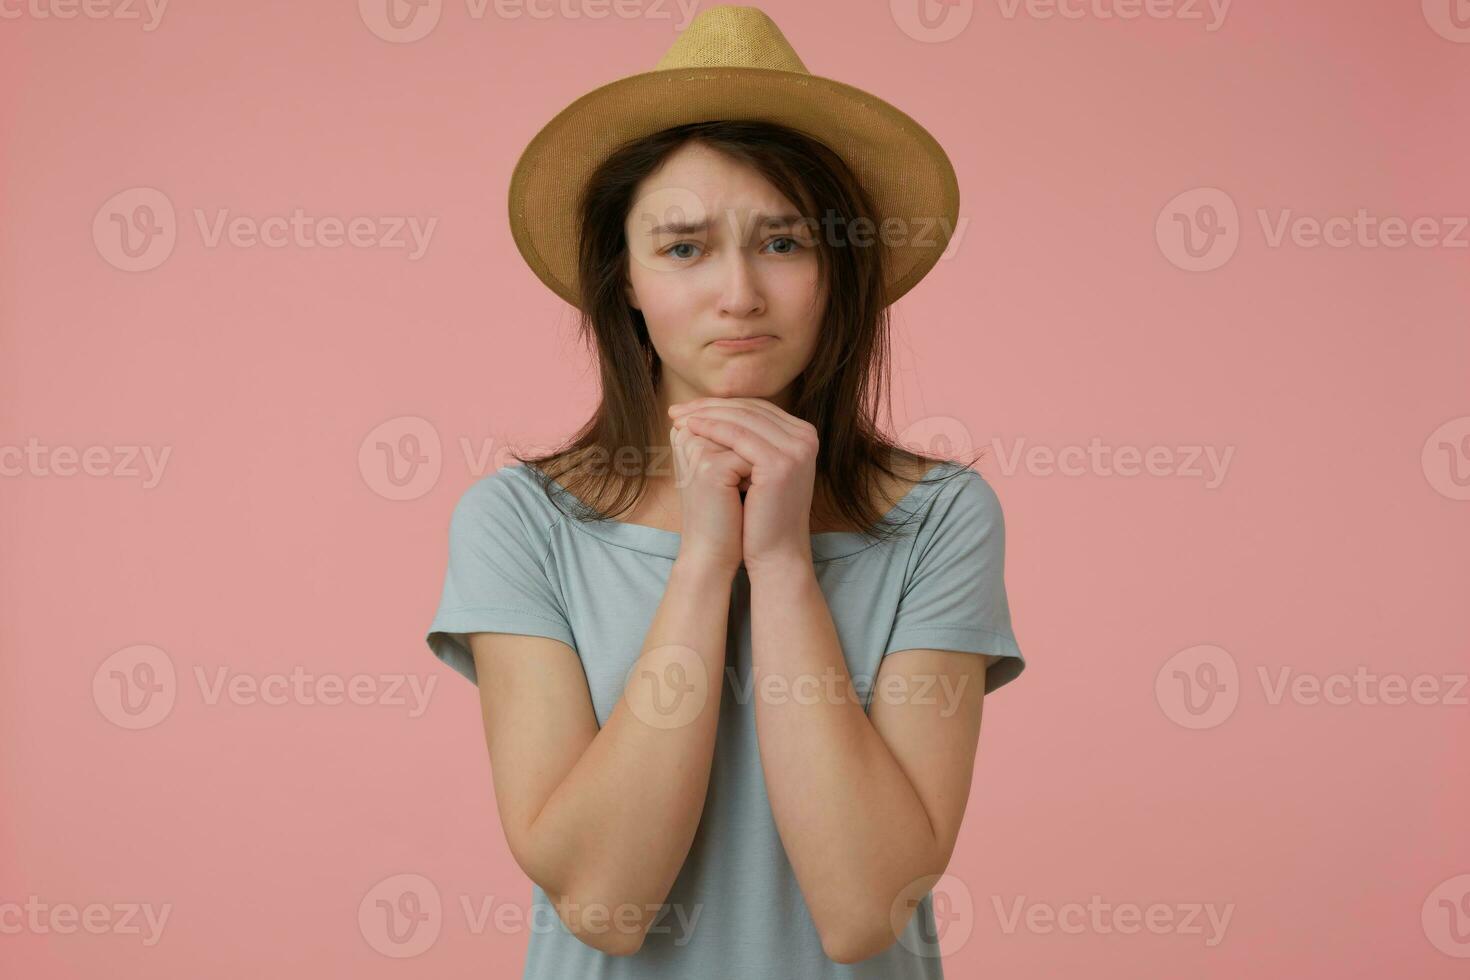 Teenage girl, woman with begging look and long brunette hair. Wearing blueish t-shirt and hat. Holding hands under her chin and ask. Watching at the camera isolated over pastel pink background photo